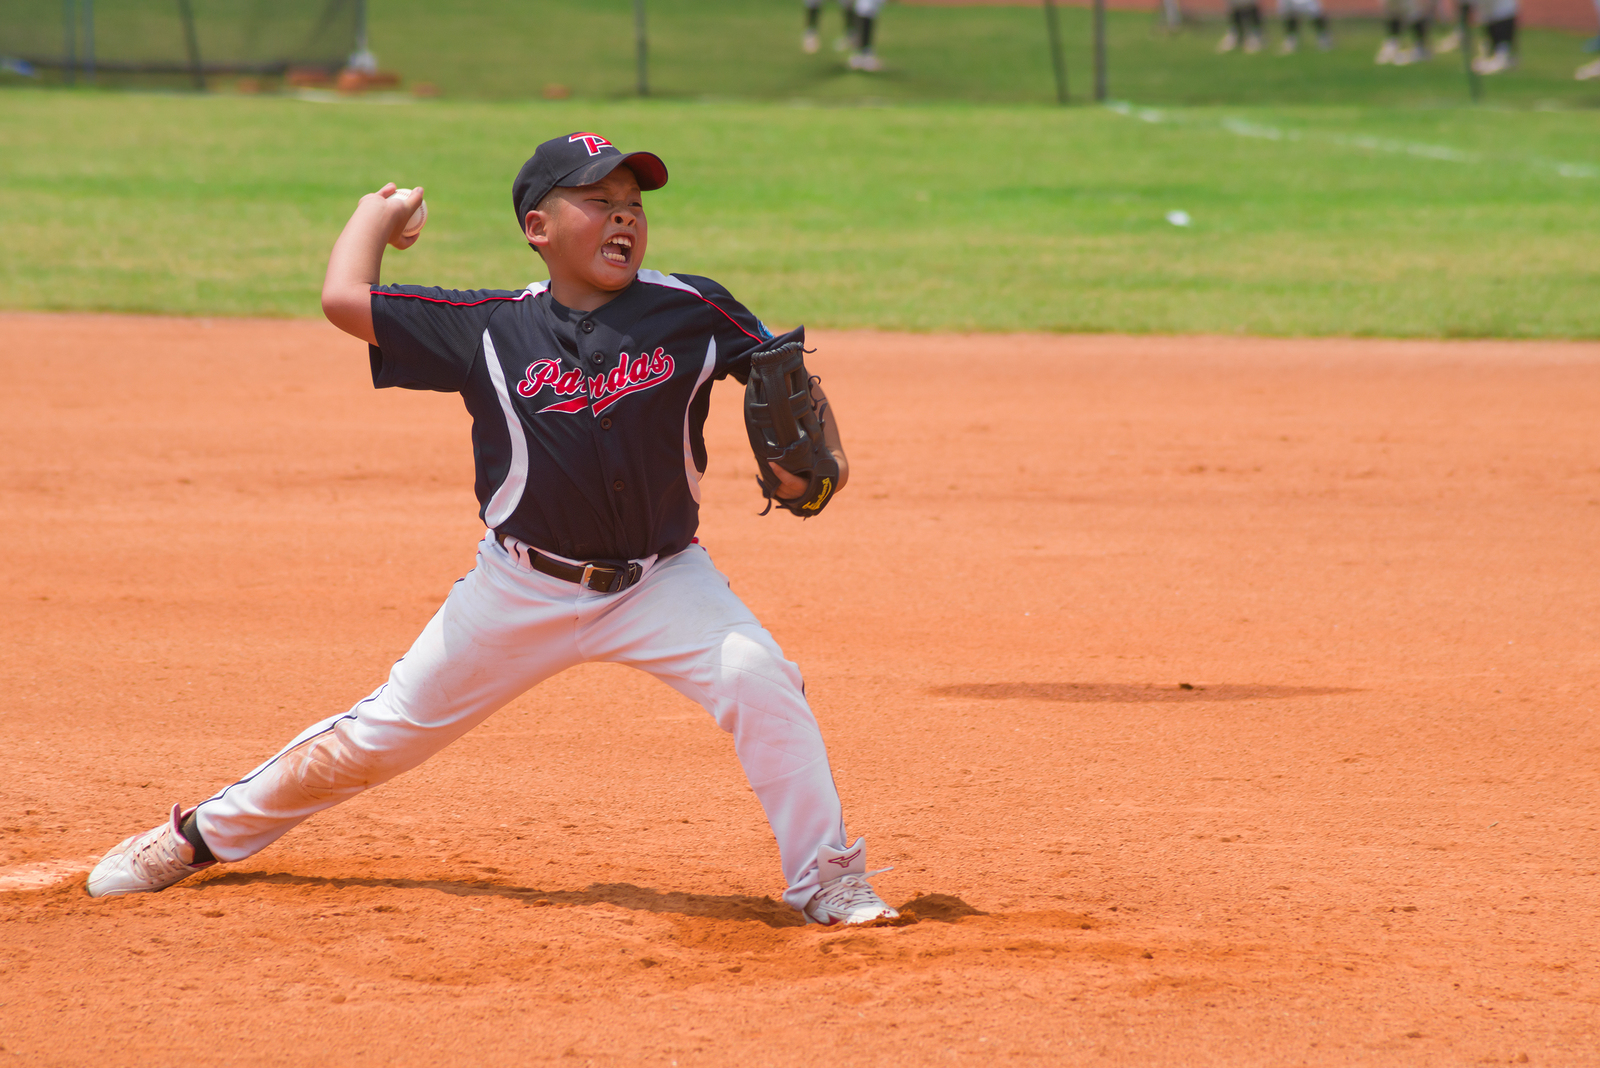 Preparing Your Baseball Team Mentally For the Big Game